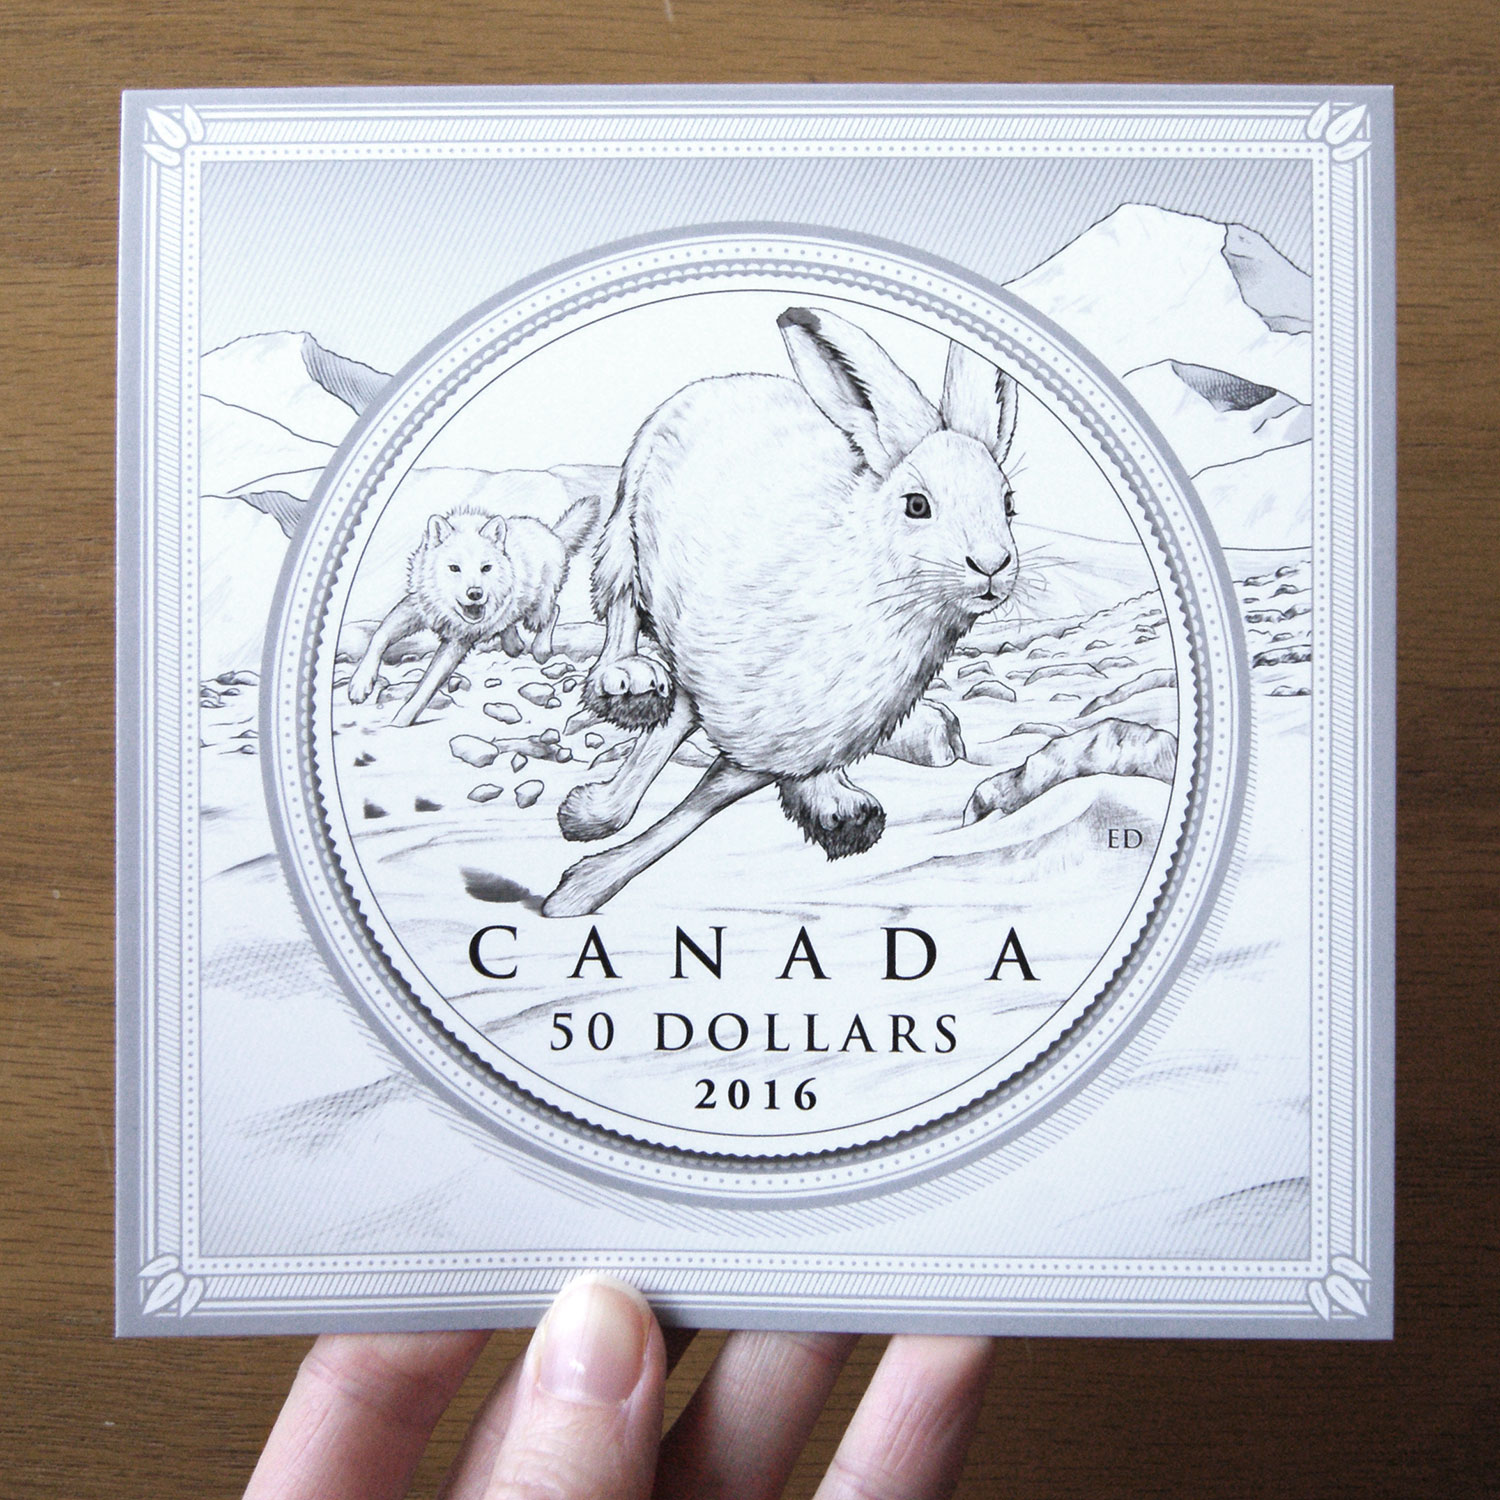 Arctic hare coin illustration by Emily damstra